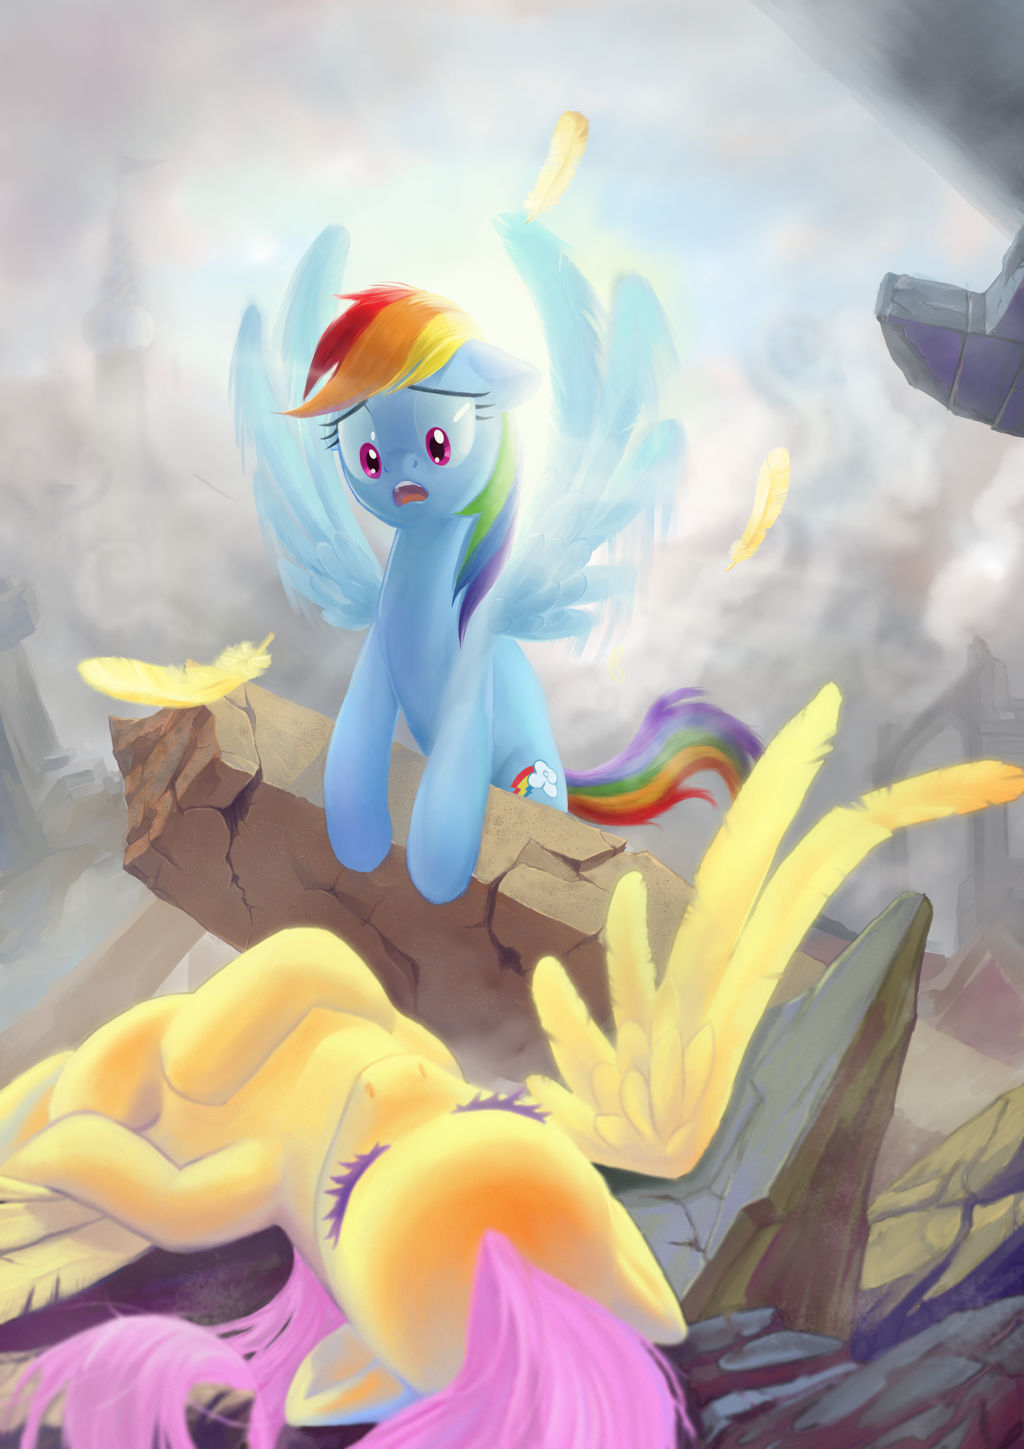 In the remains of Canterlot